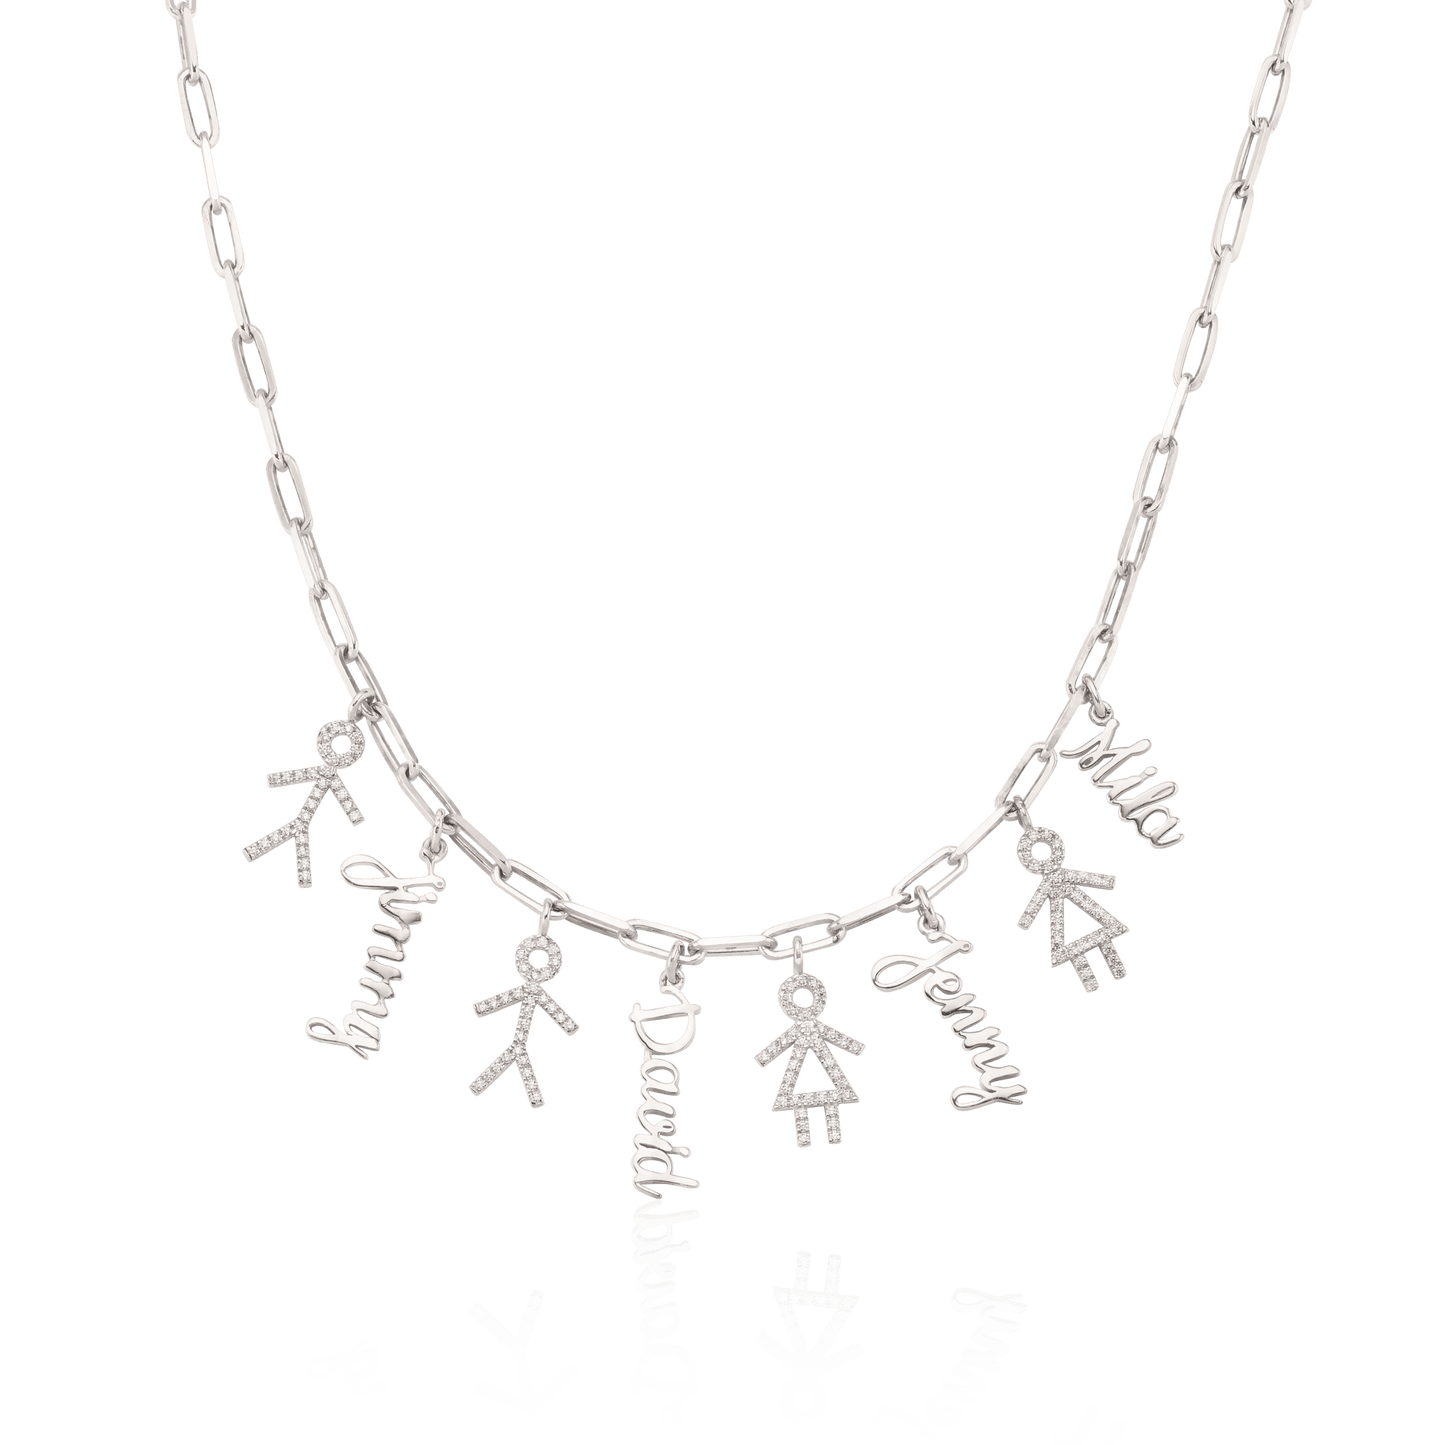 Kith & Kin Necklace - 925 Sterling Silver Necklaces 925 Silver Natural White Sapphire 1 Kid + 1 Name Small - 16 Inches (40cm)